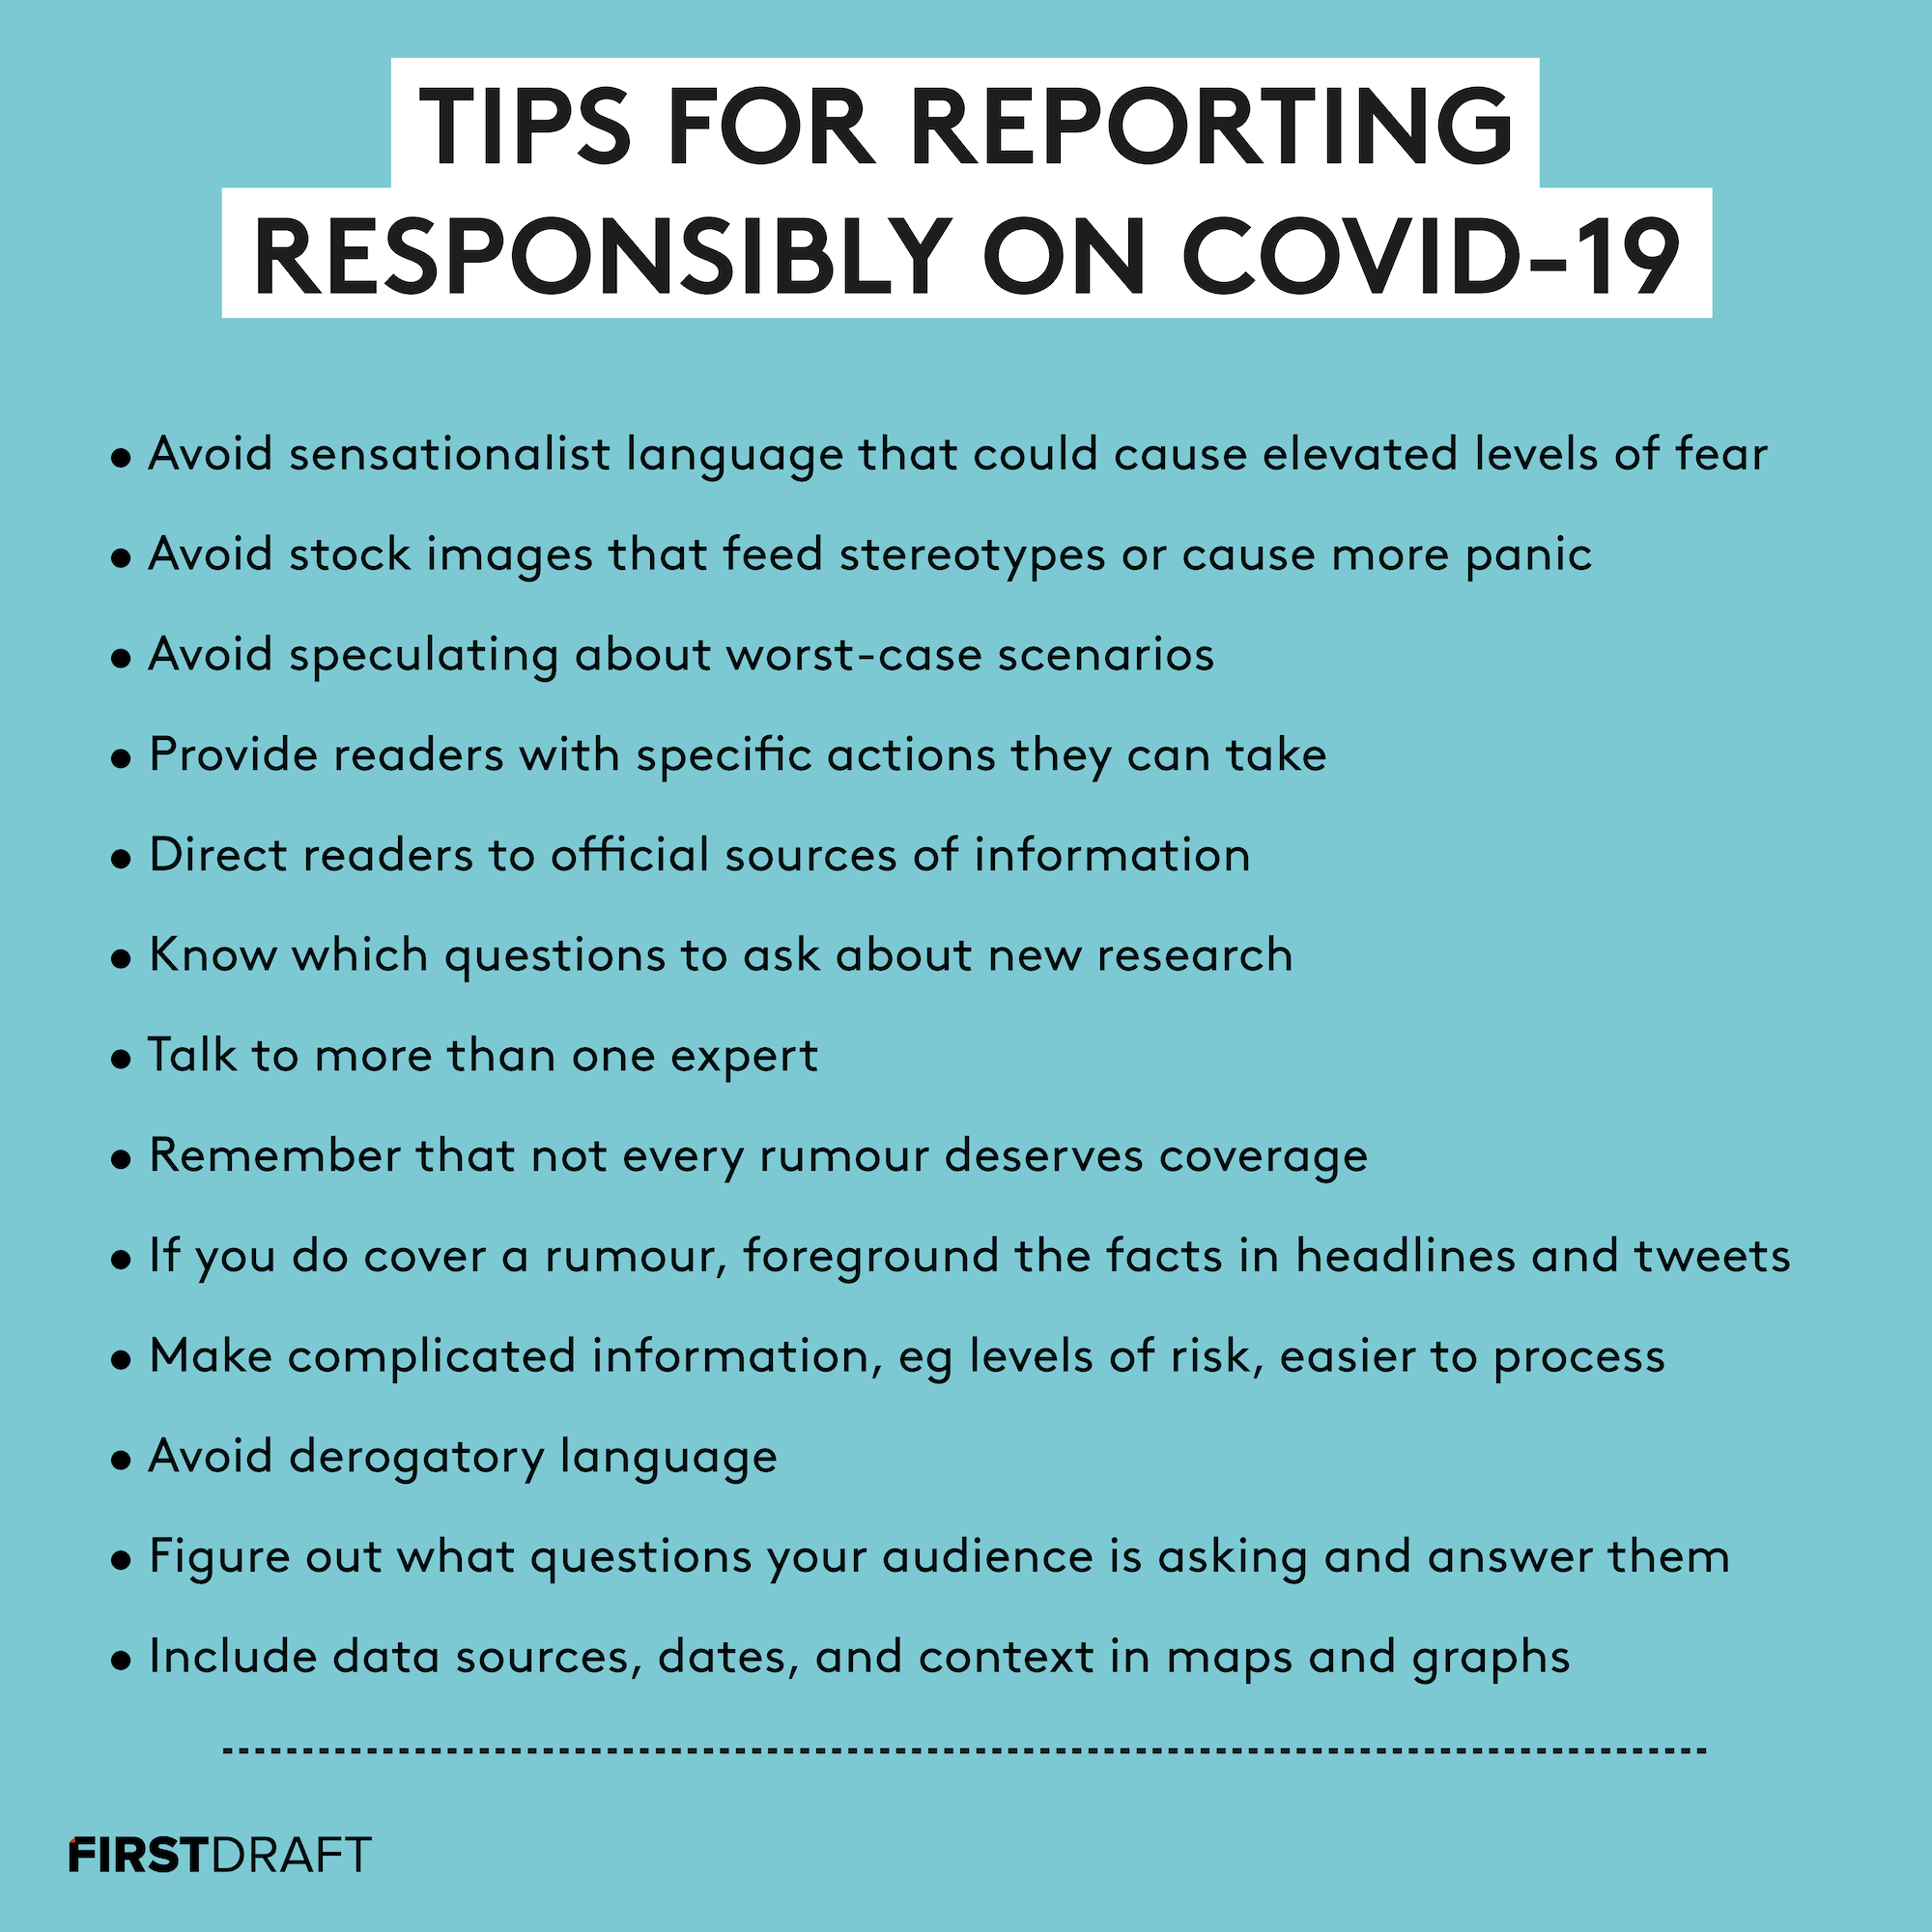 tips for journalists for
          reporting on COVID-19